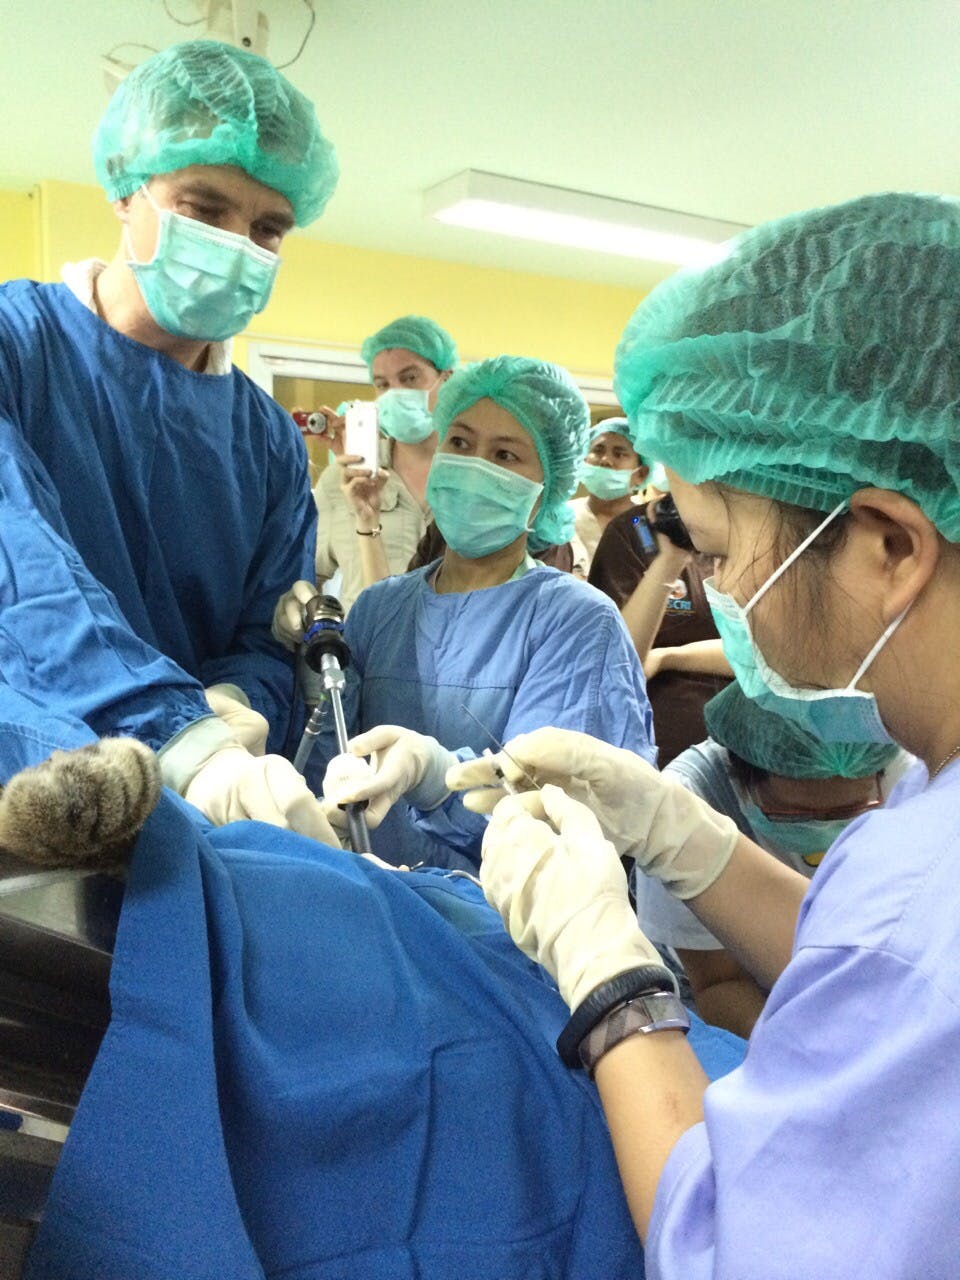 Veterinary team in scrubs performing artificial insemination on a sedated clouded leopard in a surgical environment